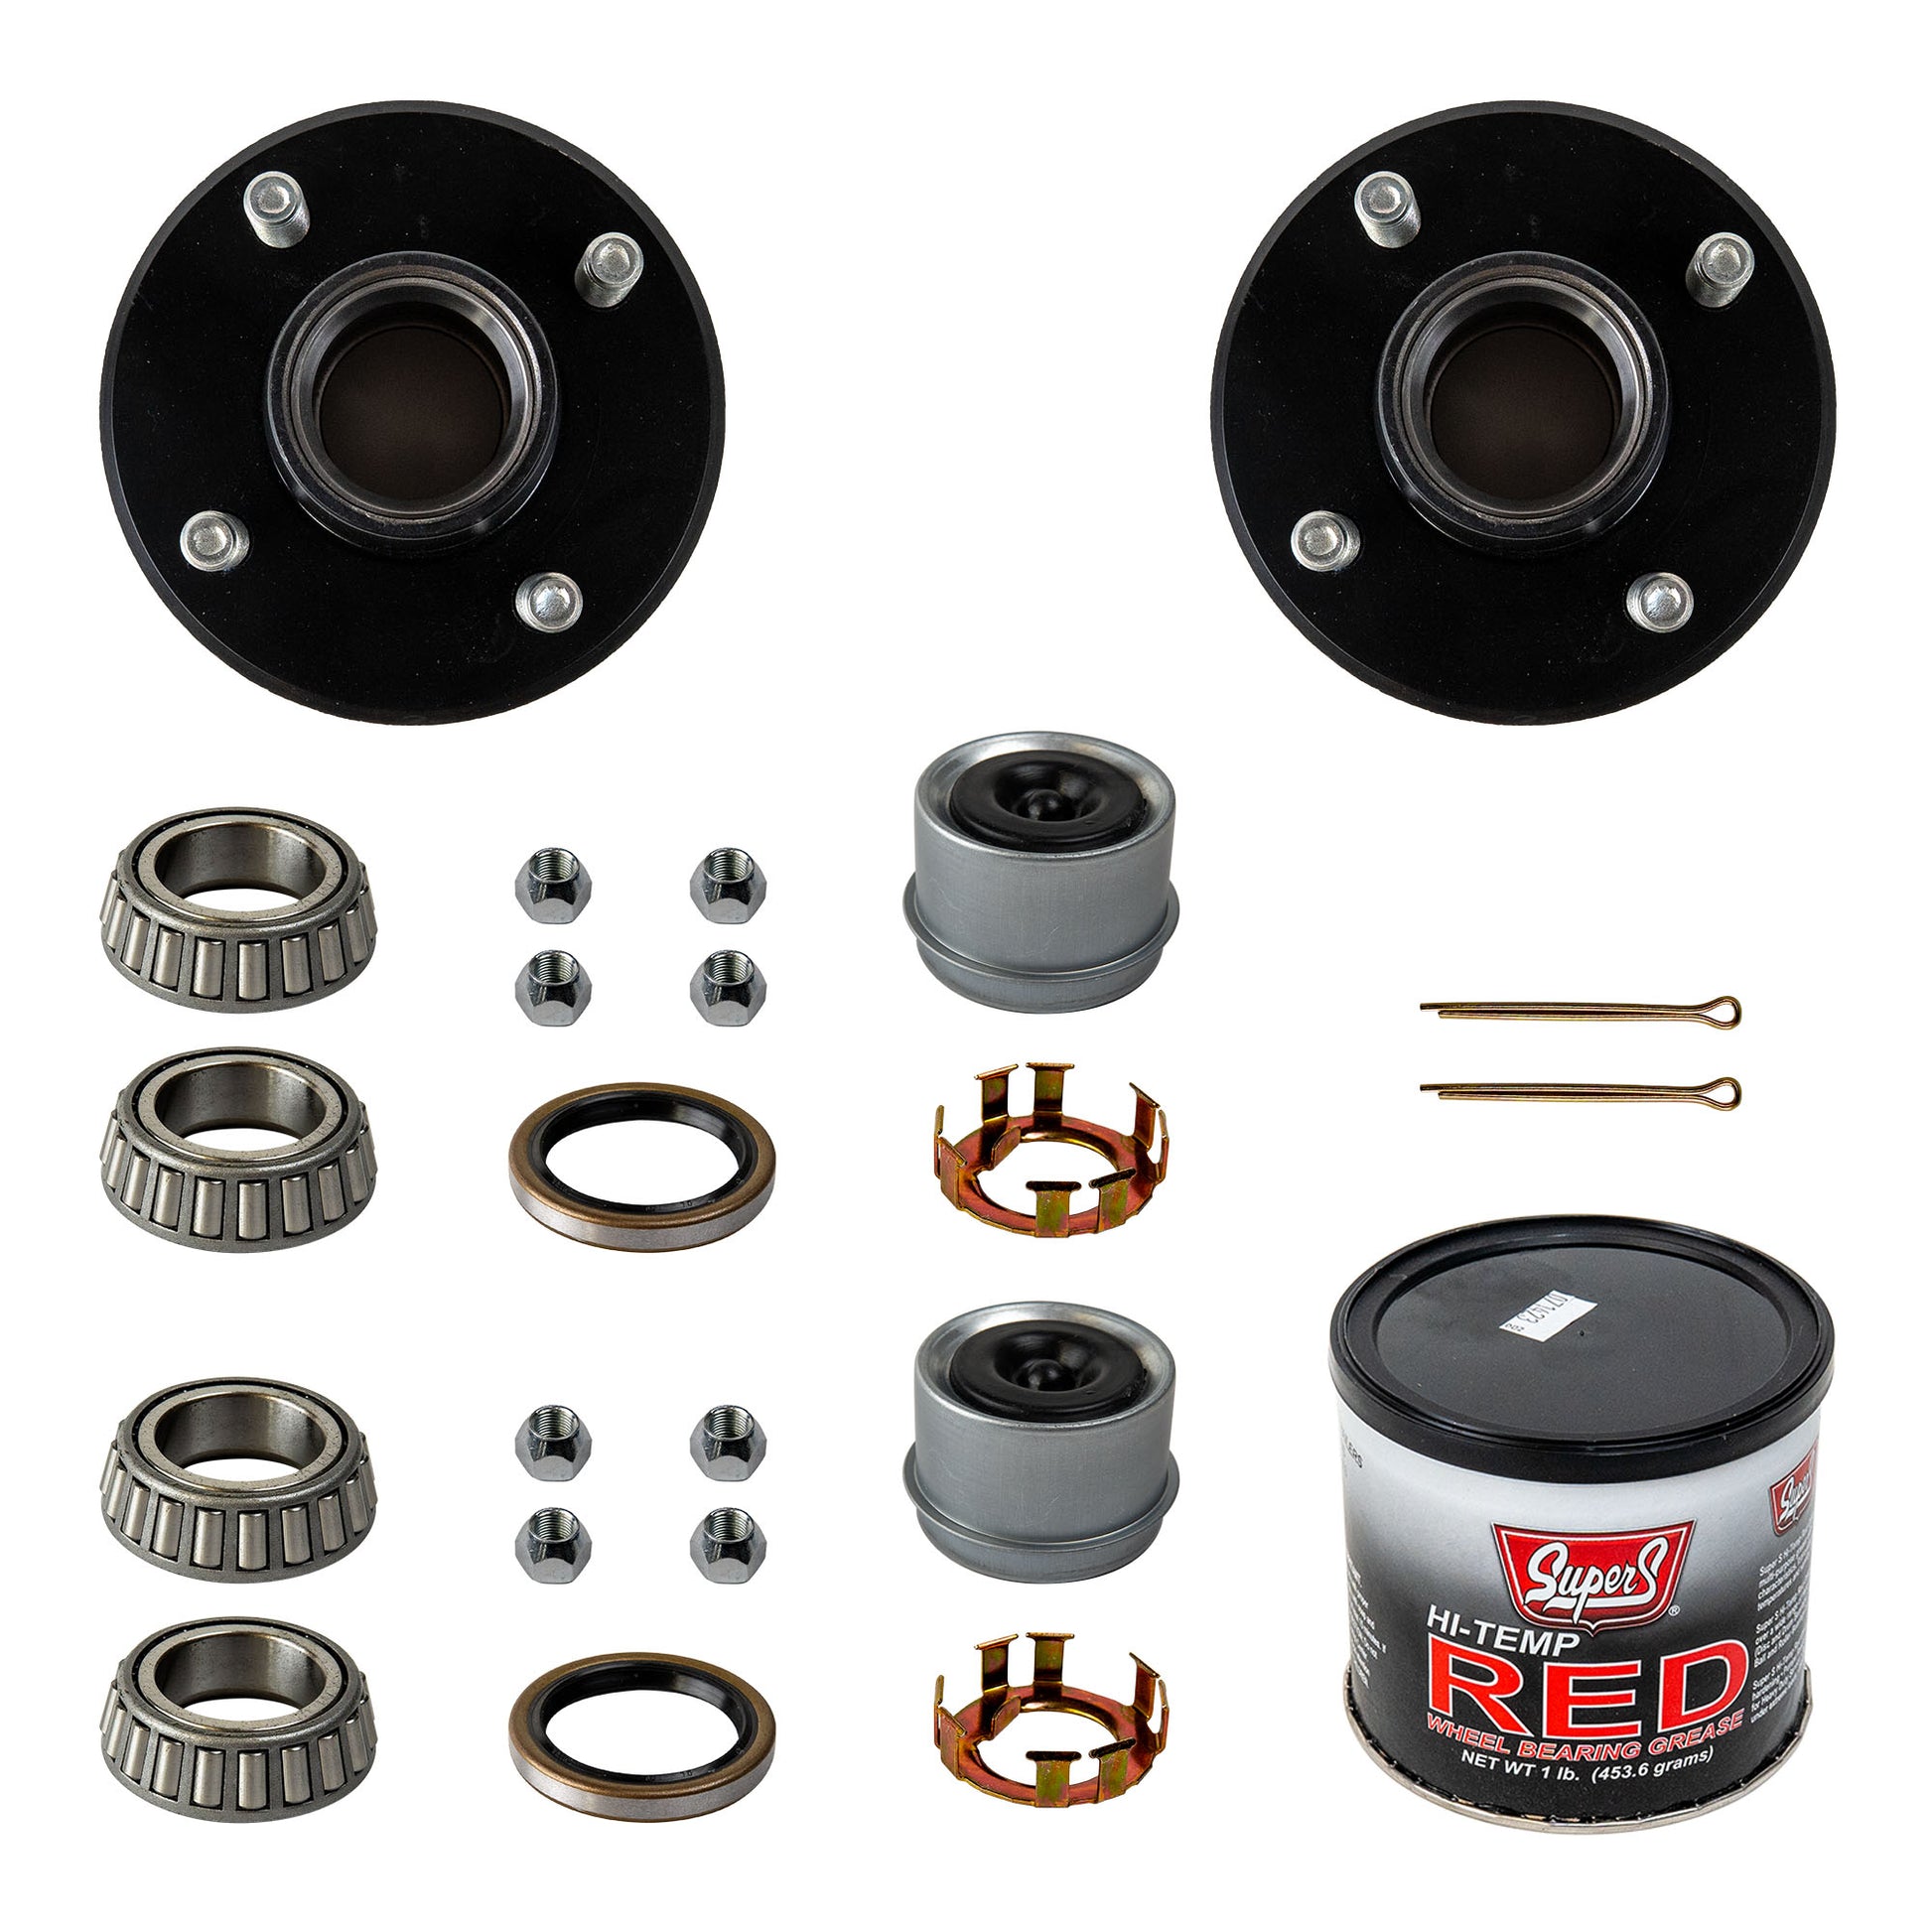 2k Trailer Axle Hub - 4 or 5 Lug - The Trailer Parts Outlet